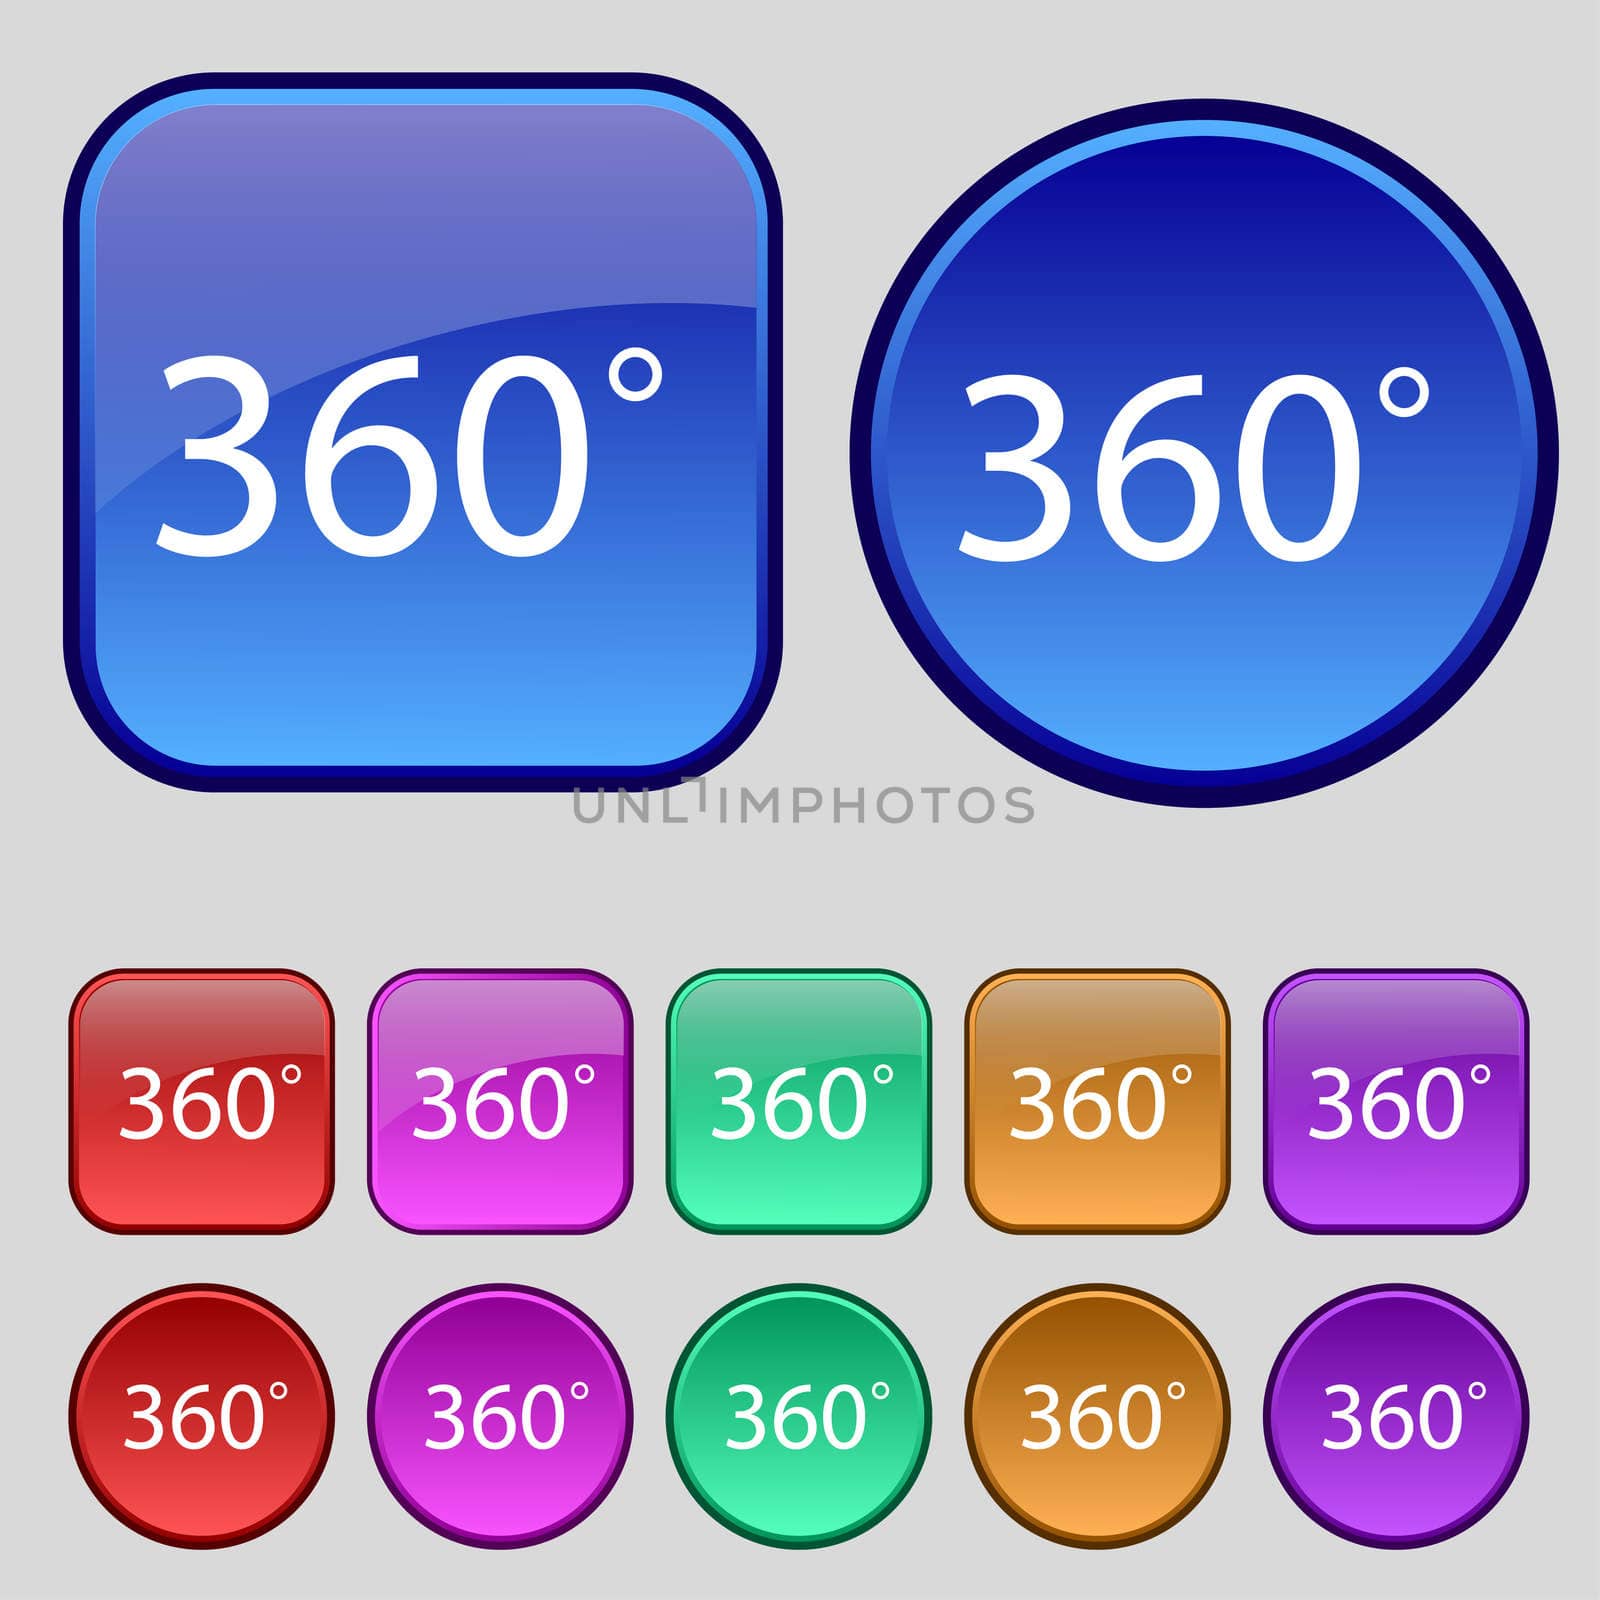 Angle 360 degrees sign icon. Geometry math symbol. Full rotation. Set of colored buttons. illustration